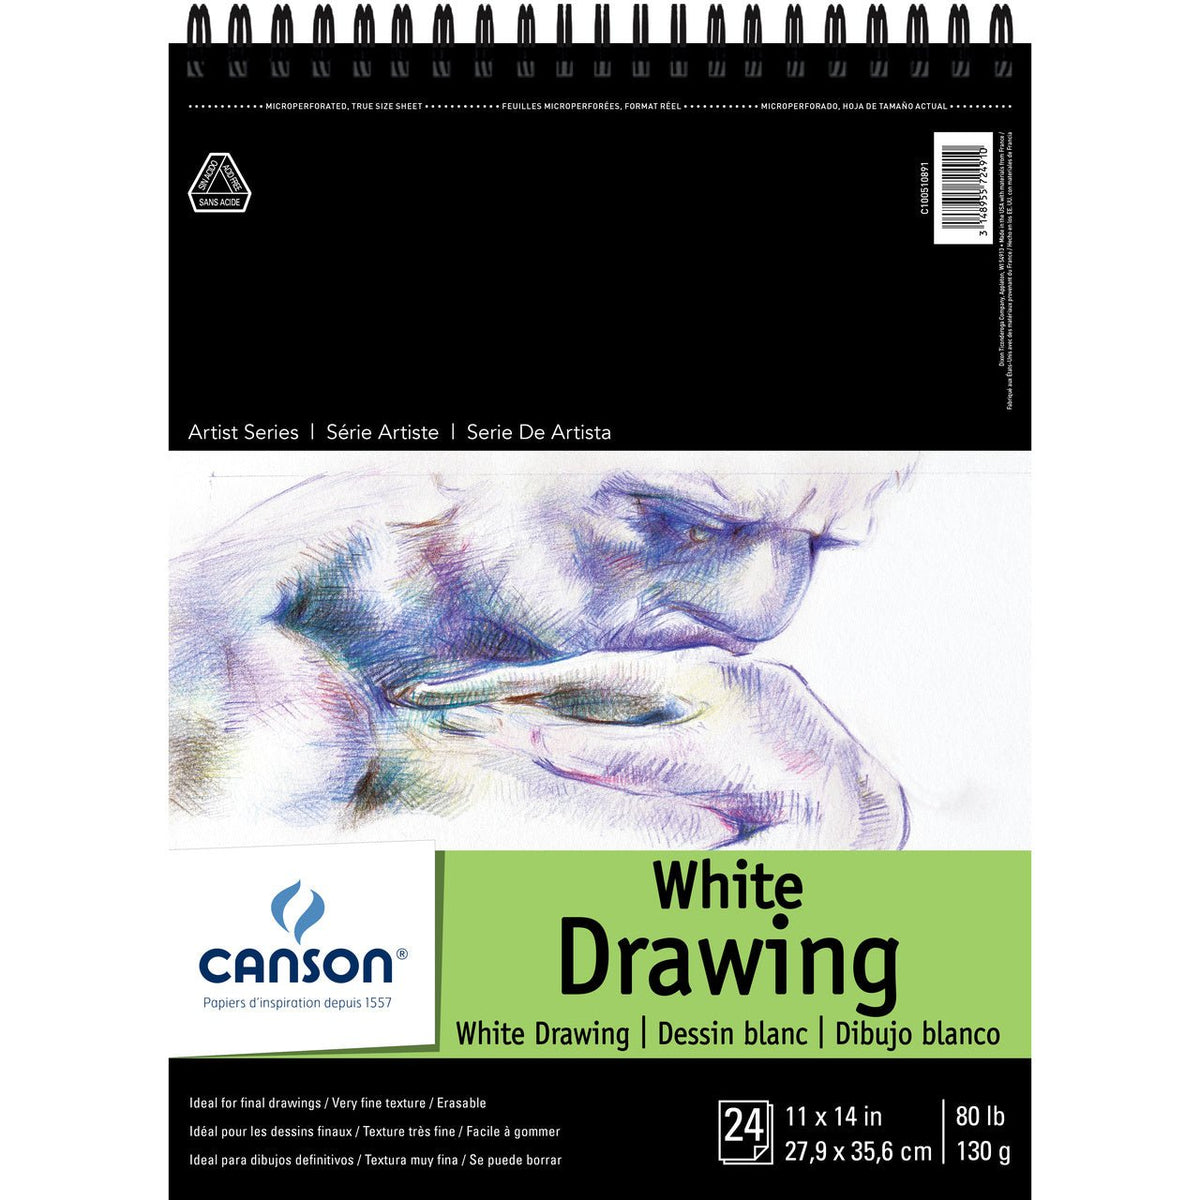 Canson Pure White 80 lb Drawing Pad 11x14 inch - merriartist.com